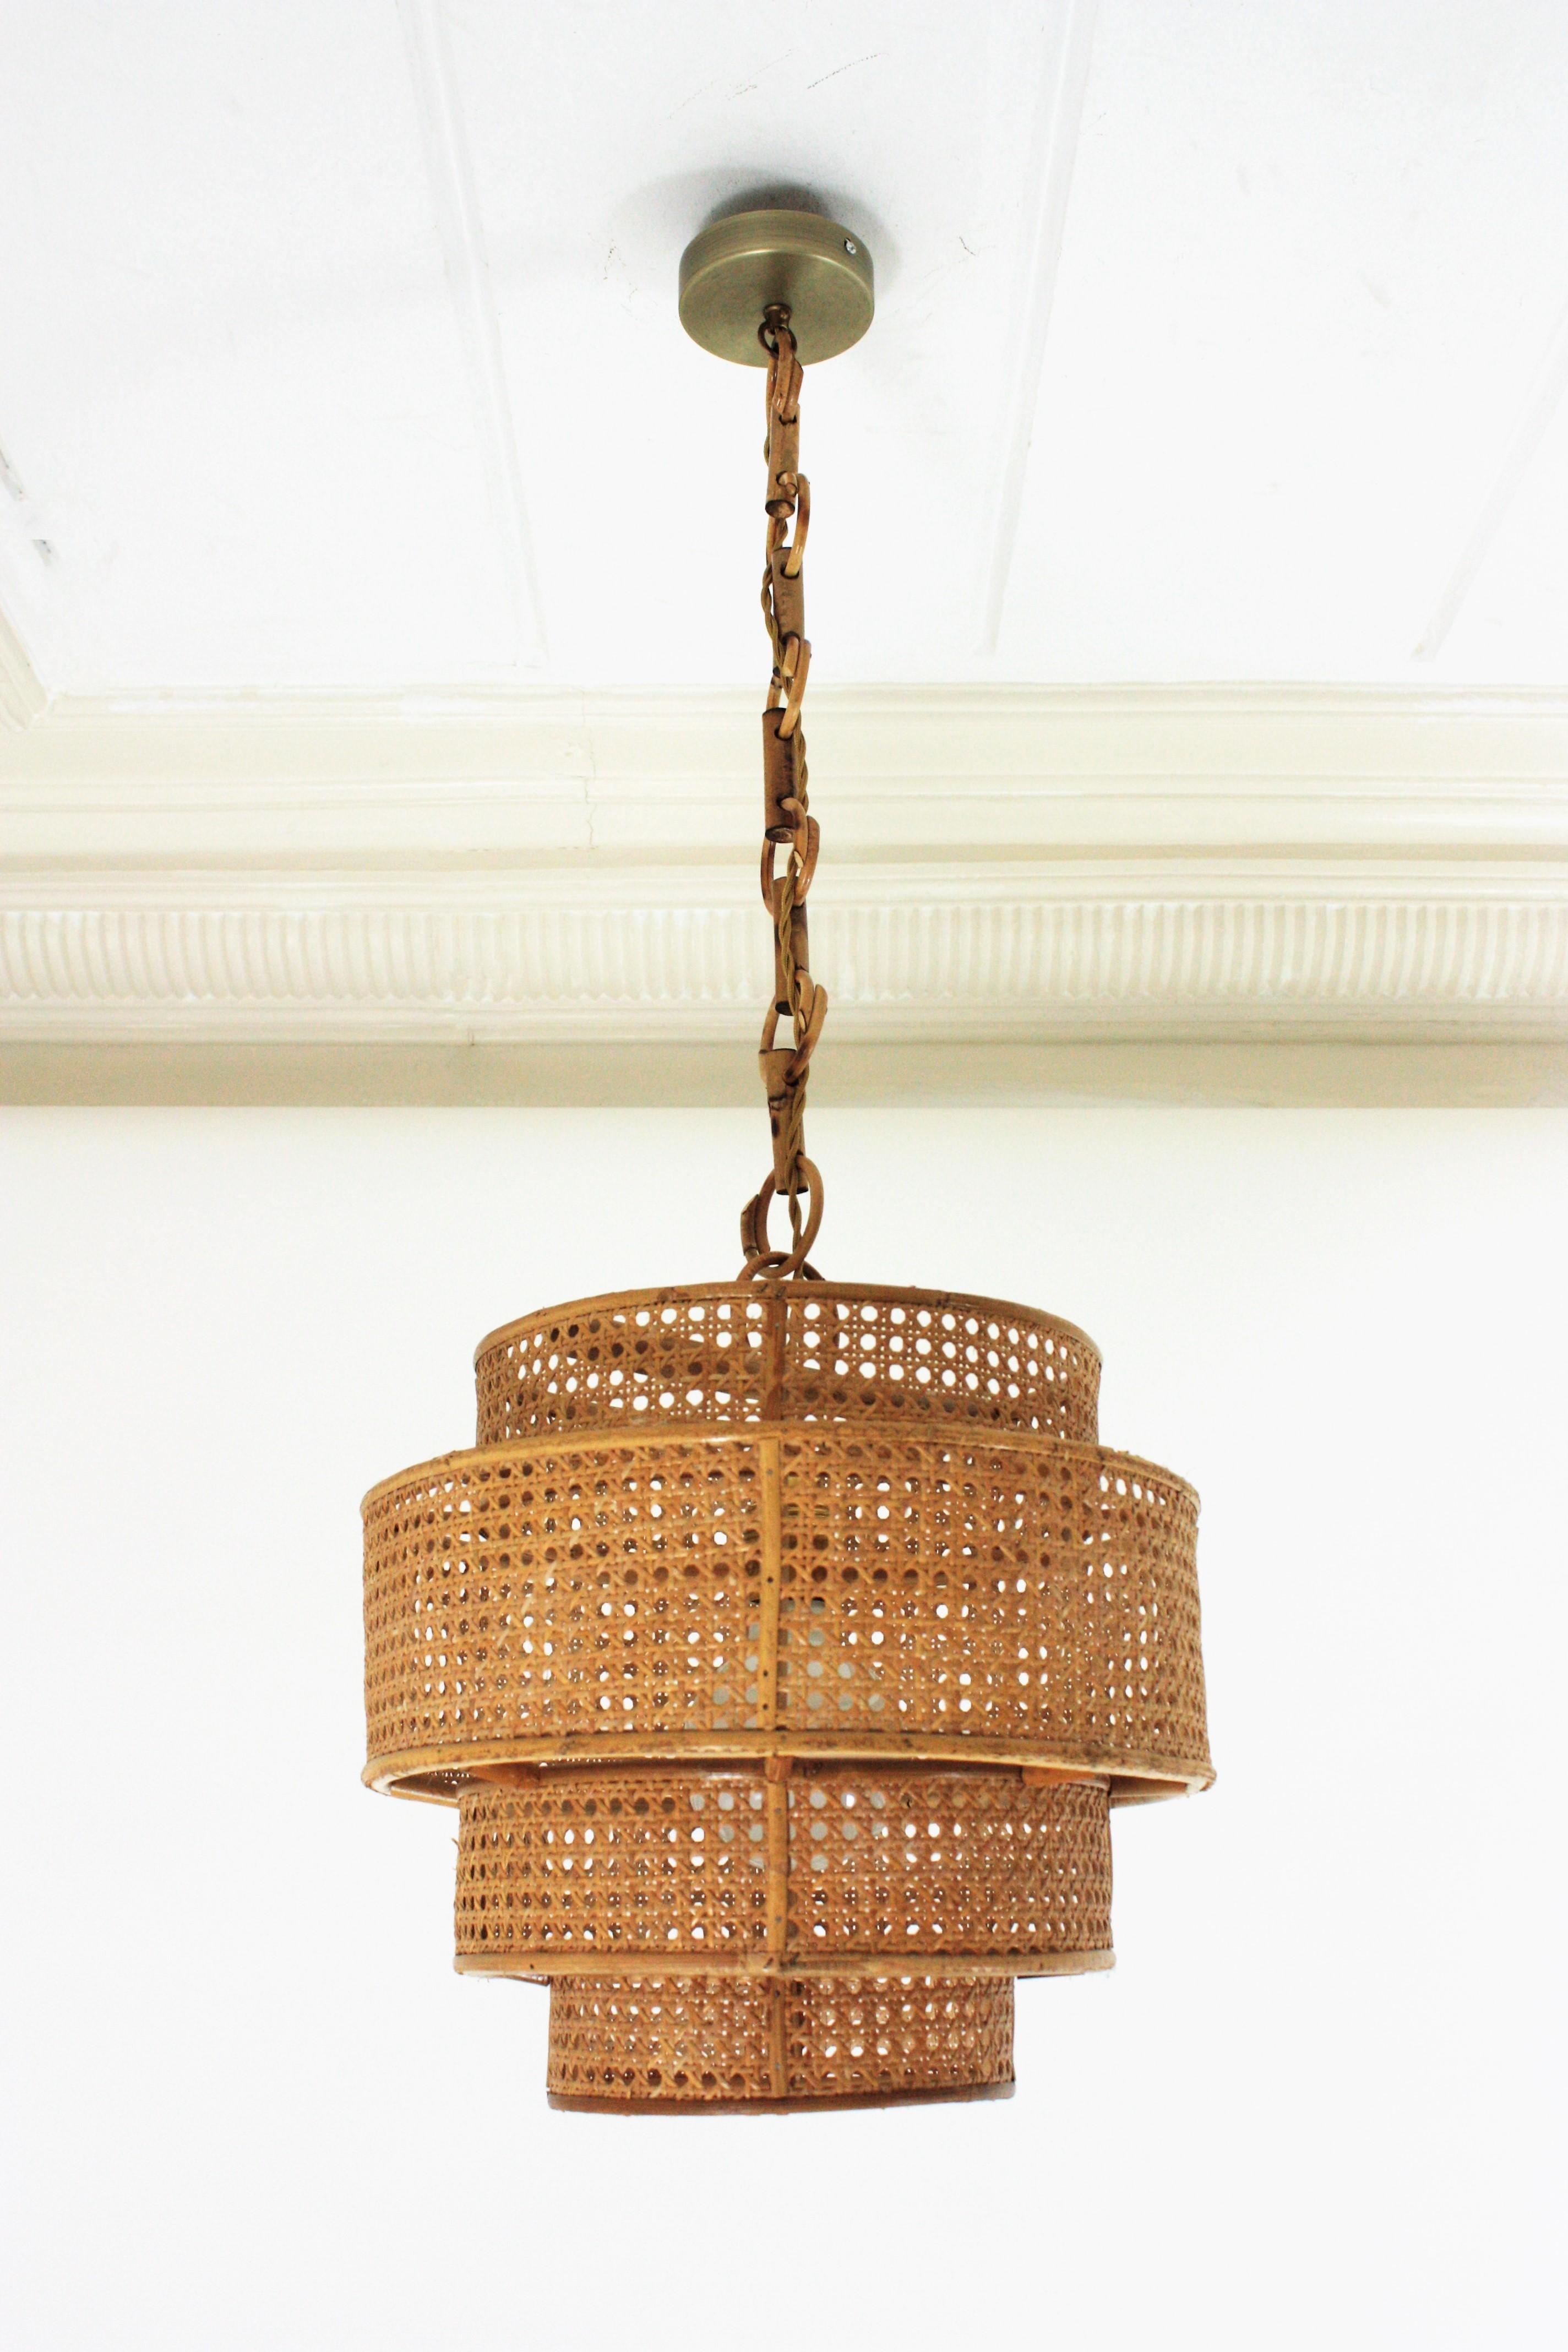 Hand-Crafted  Rattan Wicker Weave Concentric Cylinder Pendant Hanging Light  For Sale